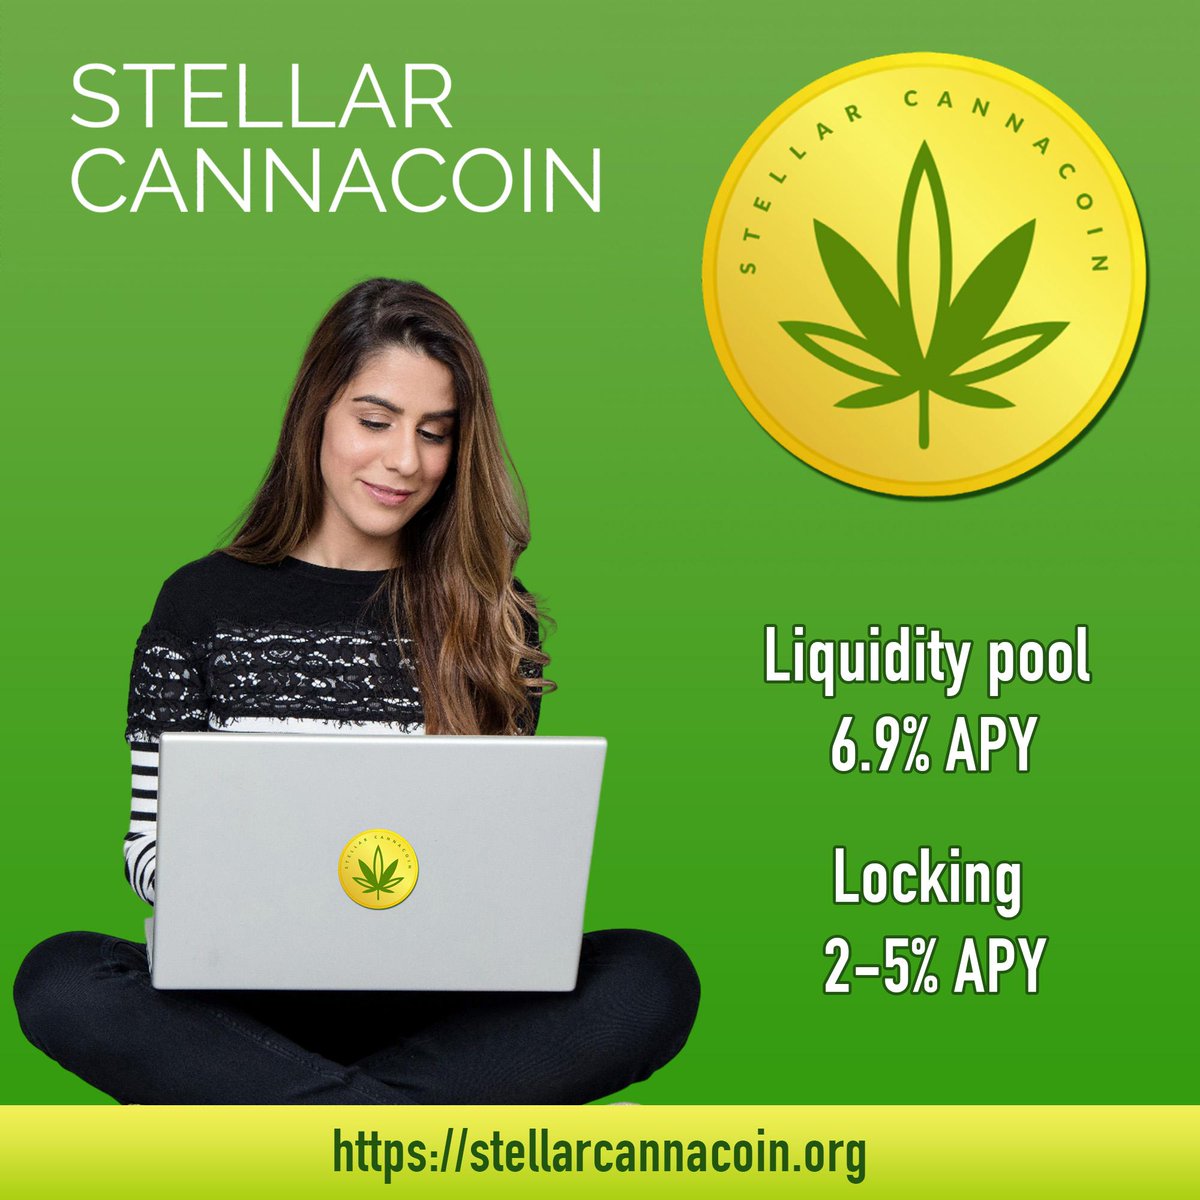 @CannaCoin @StashAppWallet is a great opportunity to get into the #cannabisindustry through #Blockchain #BuiltOnStellar. The APY on Cannacoin is 2% for 3 months staking, 3% for 6 months, and 5% for 12 months. 🤯